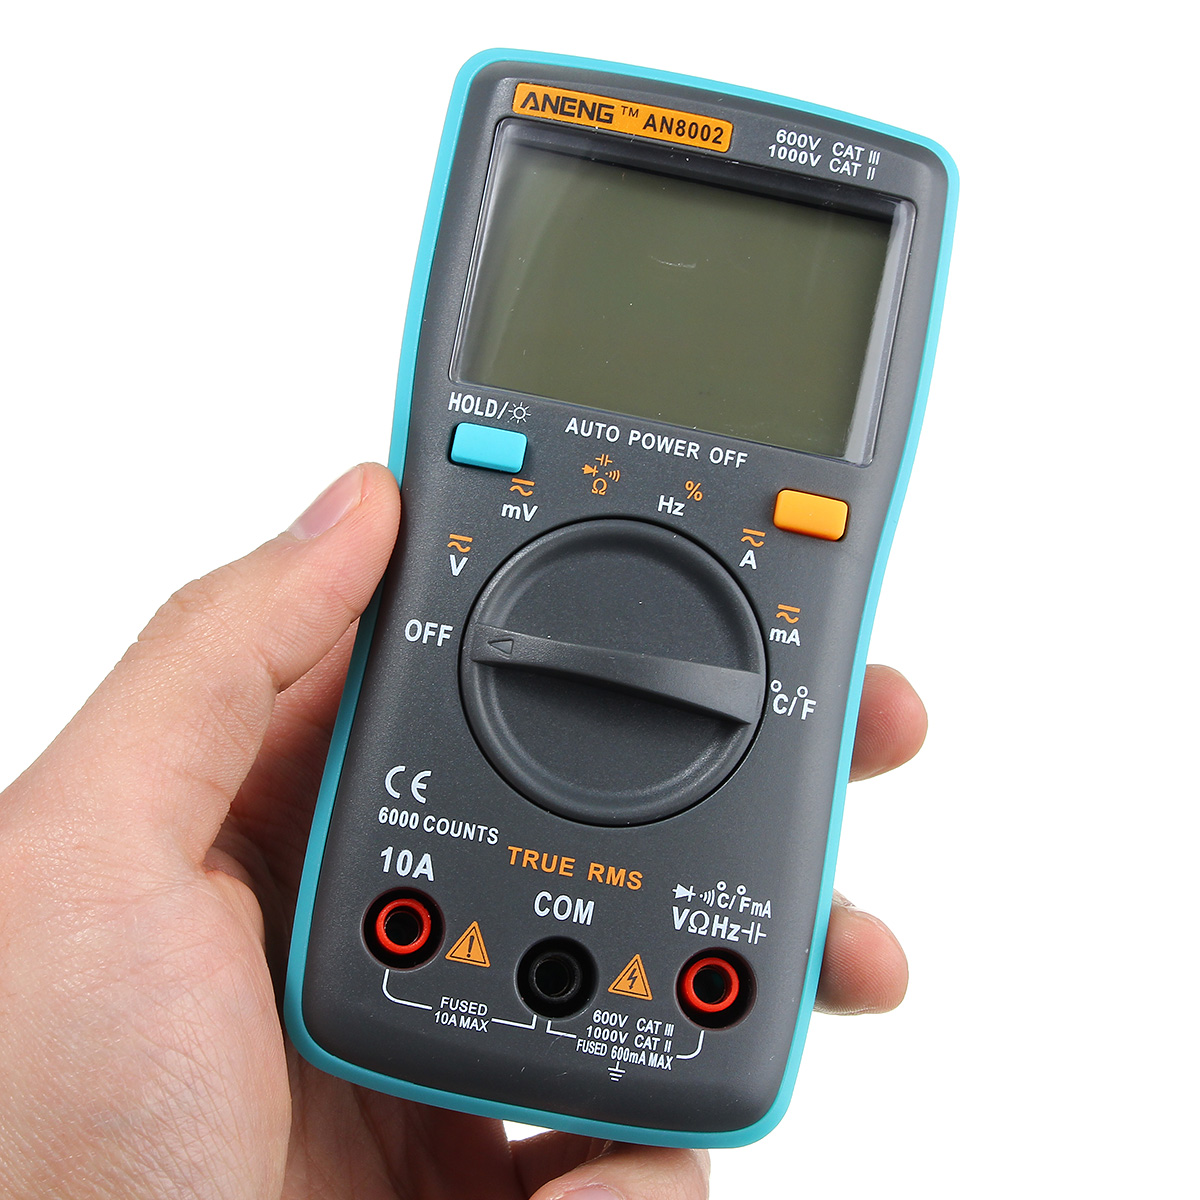 ANENG AN8002 Digital True RMS 6000 Counts Multimeter AC/DC Current Voltage Frequency Resistance Temperature Tester ℃/℉ 15